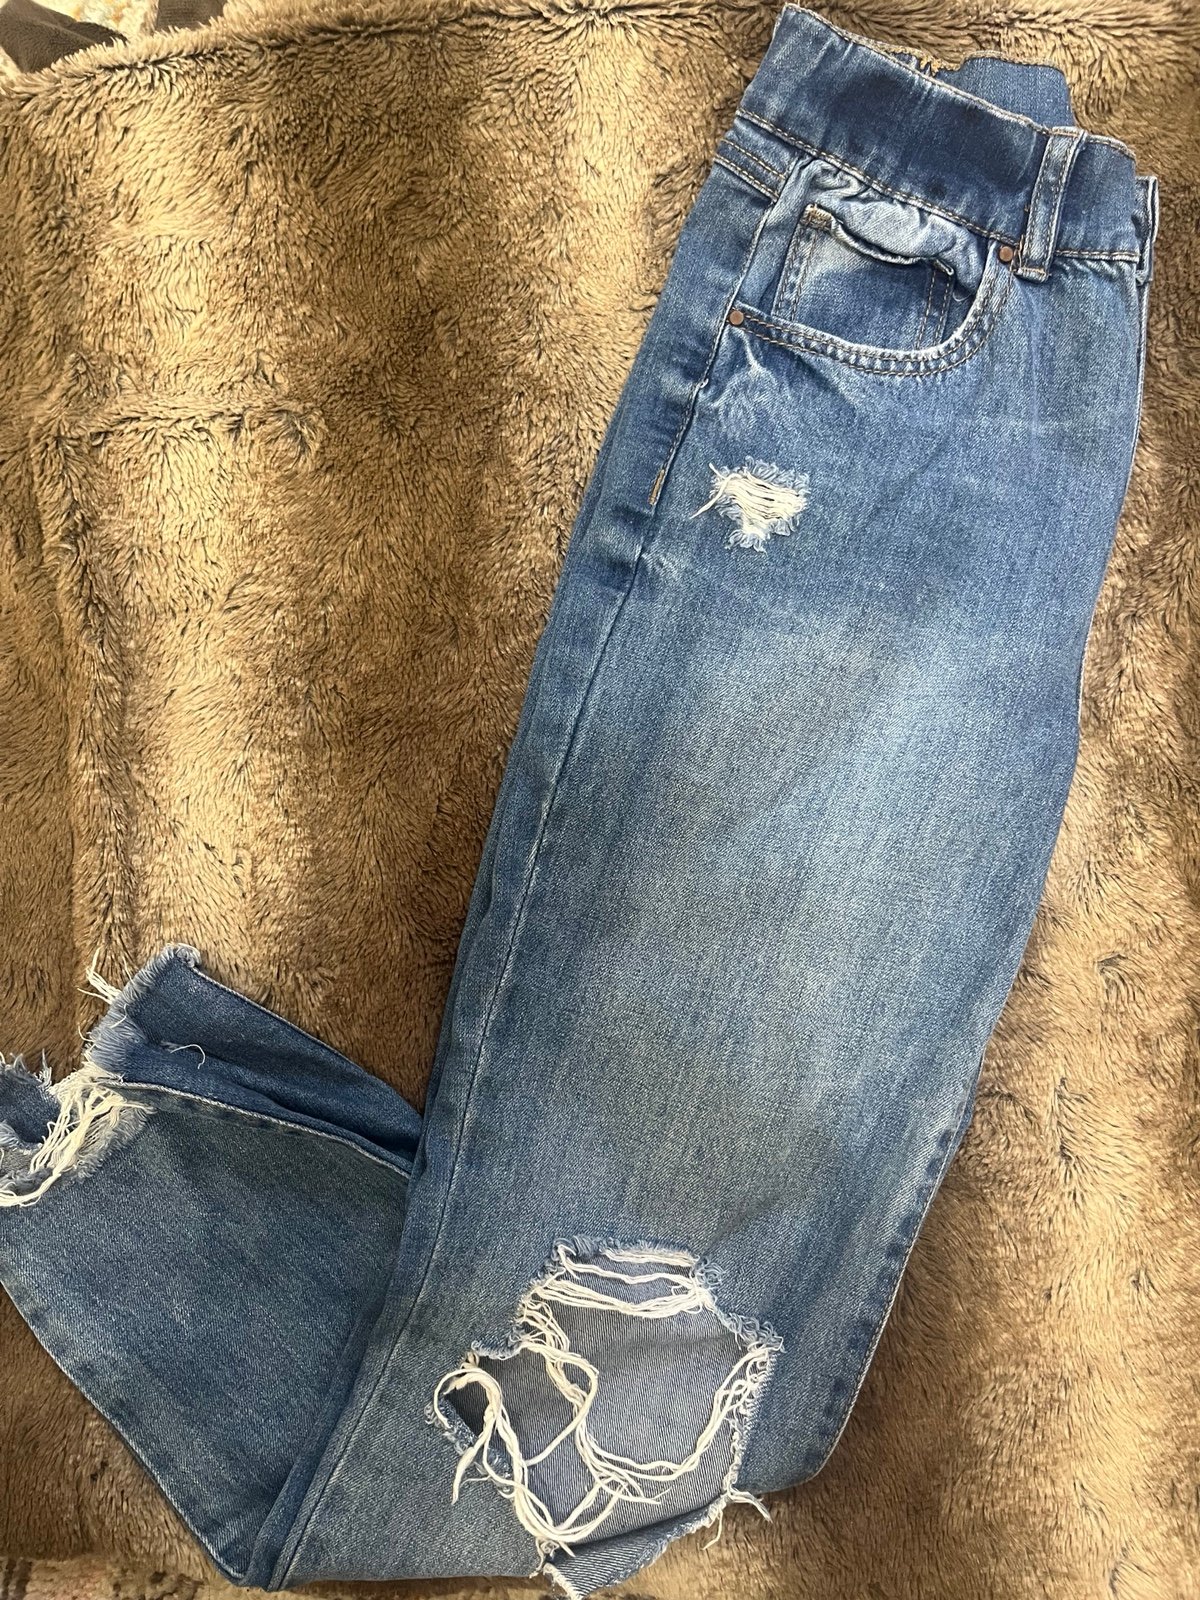 Wholesale price Distressed High Waist Mom Jeans Size 5(27)t oW2UZEOFB well sale